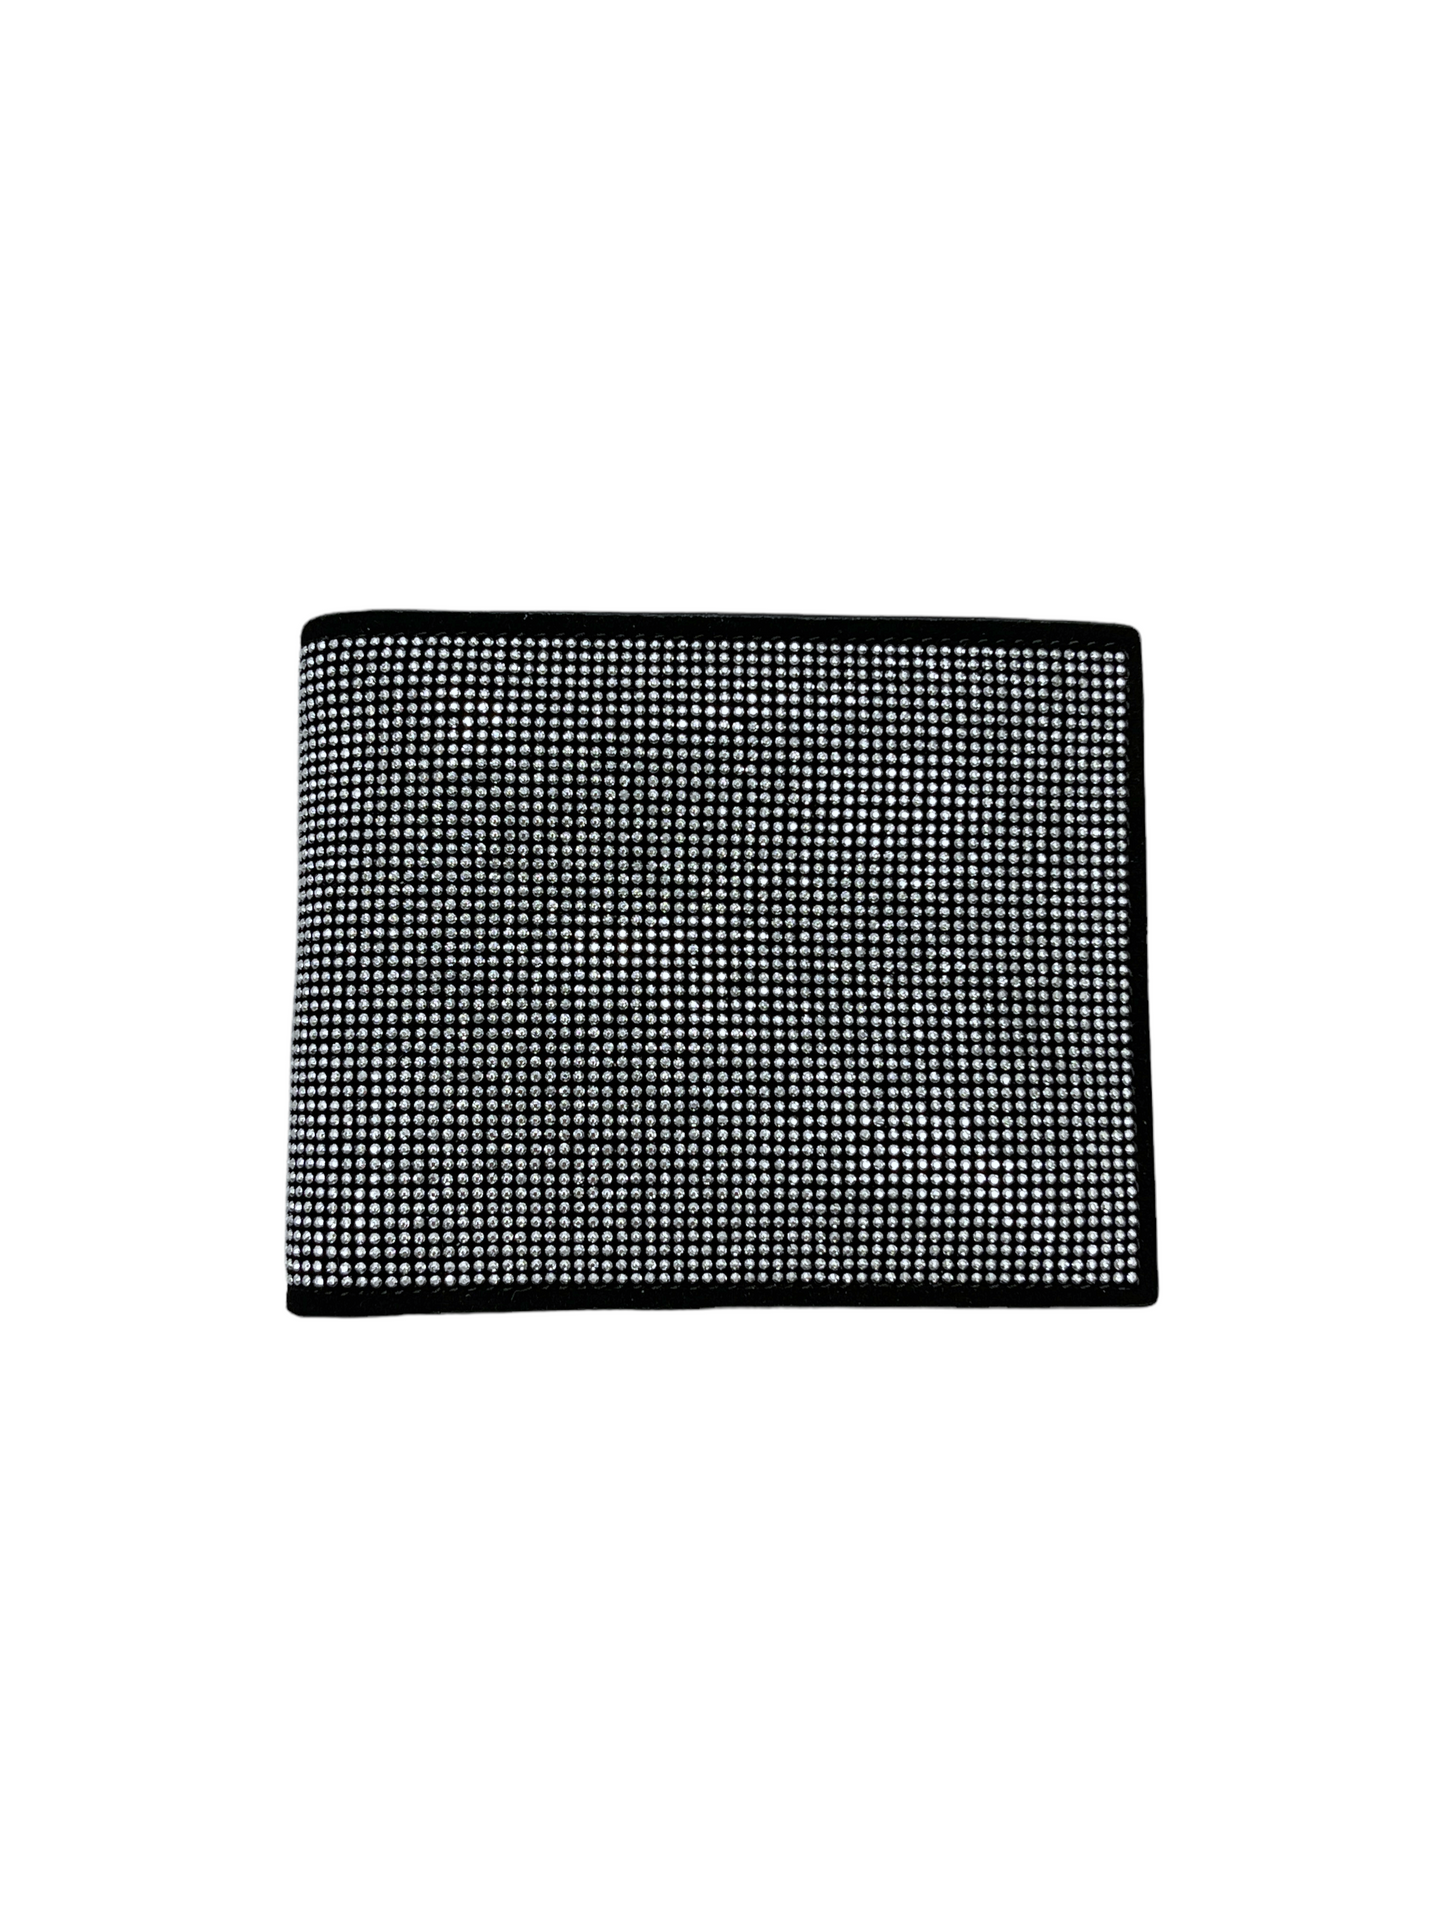 Guiseppe Zanotti Black Leather Crystal Encrusted Bi-Fold Wallet - Genuine Design luxury consignment Calgary, Alberta, Canada New and pre-owned clothing, shoes, accessories.